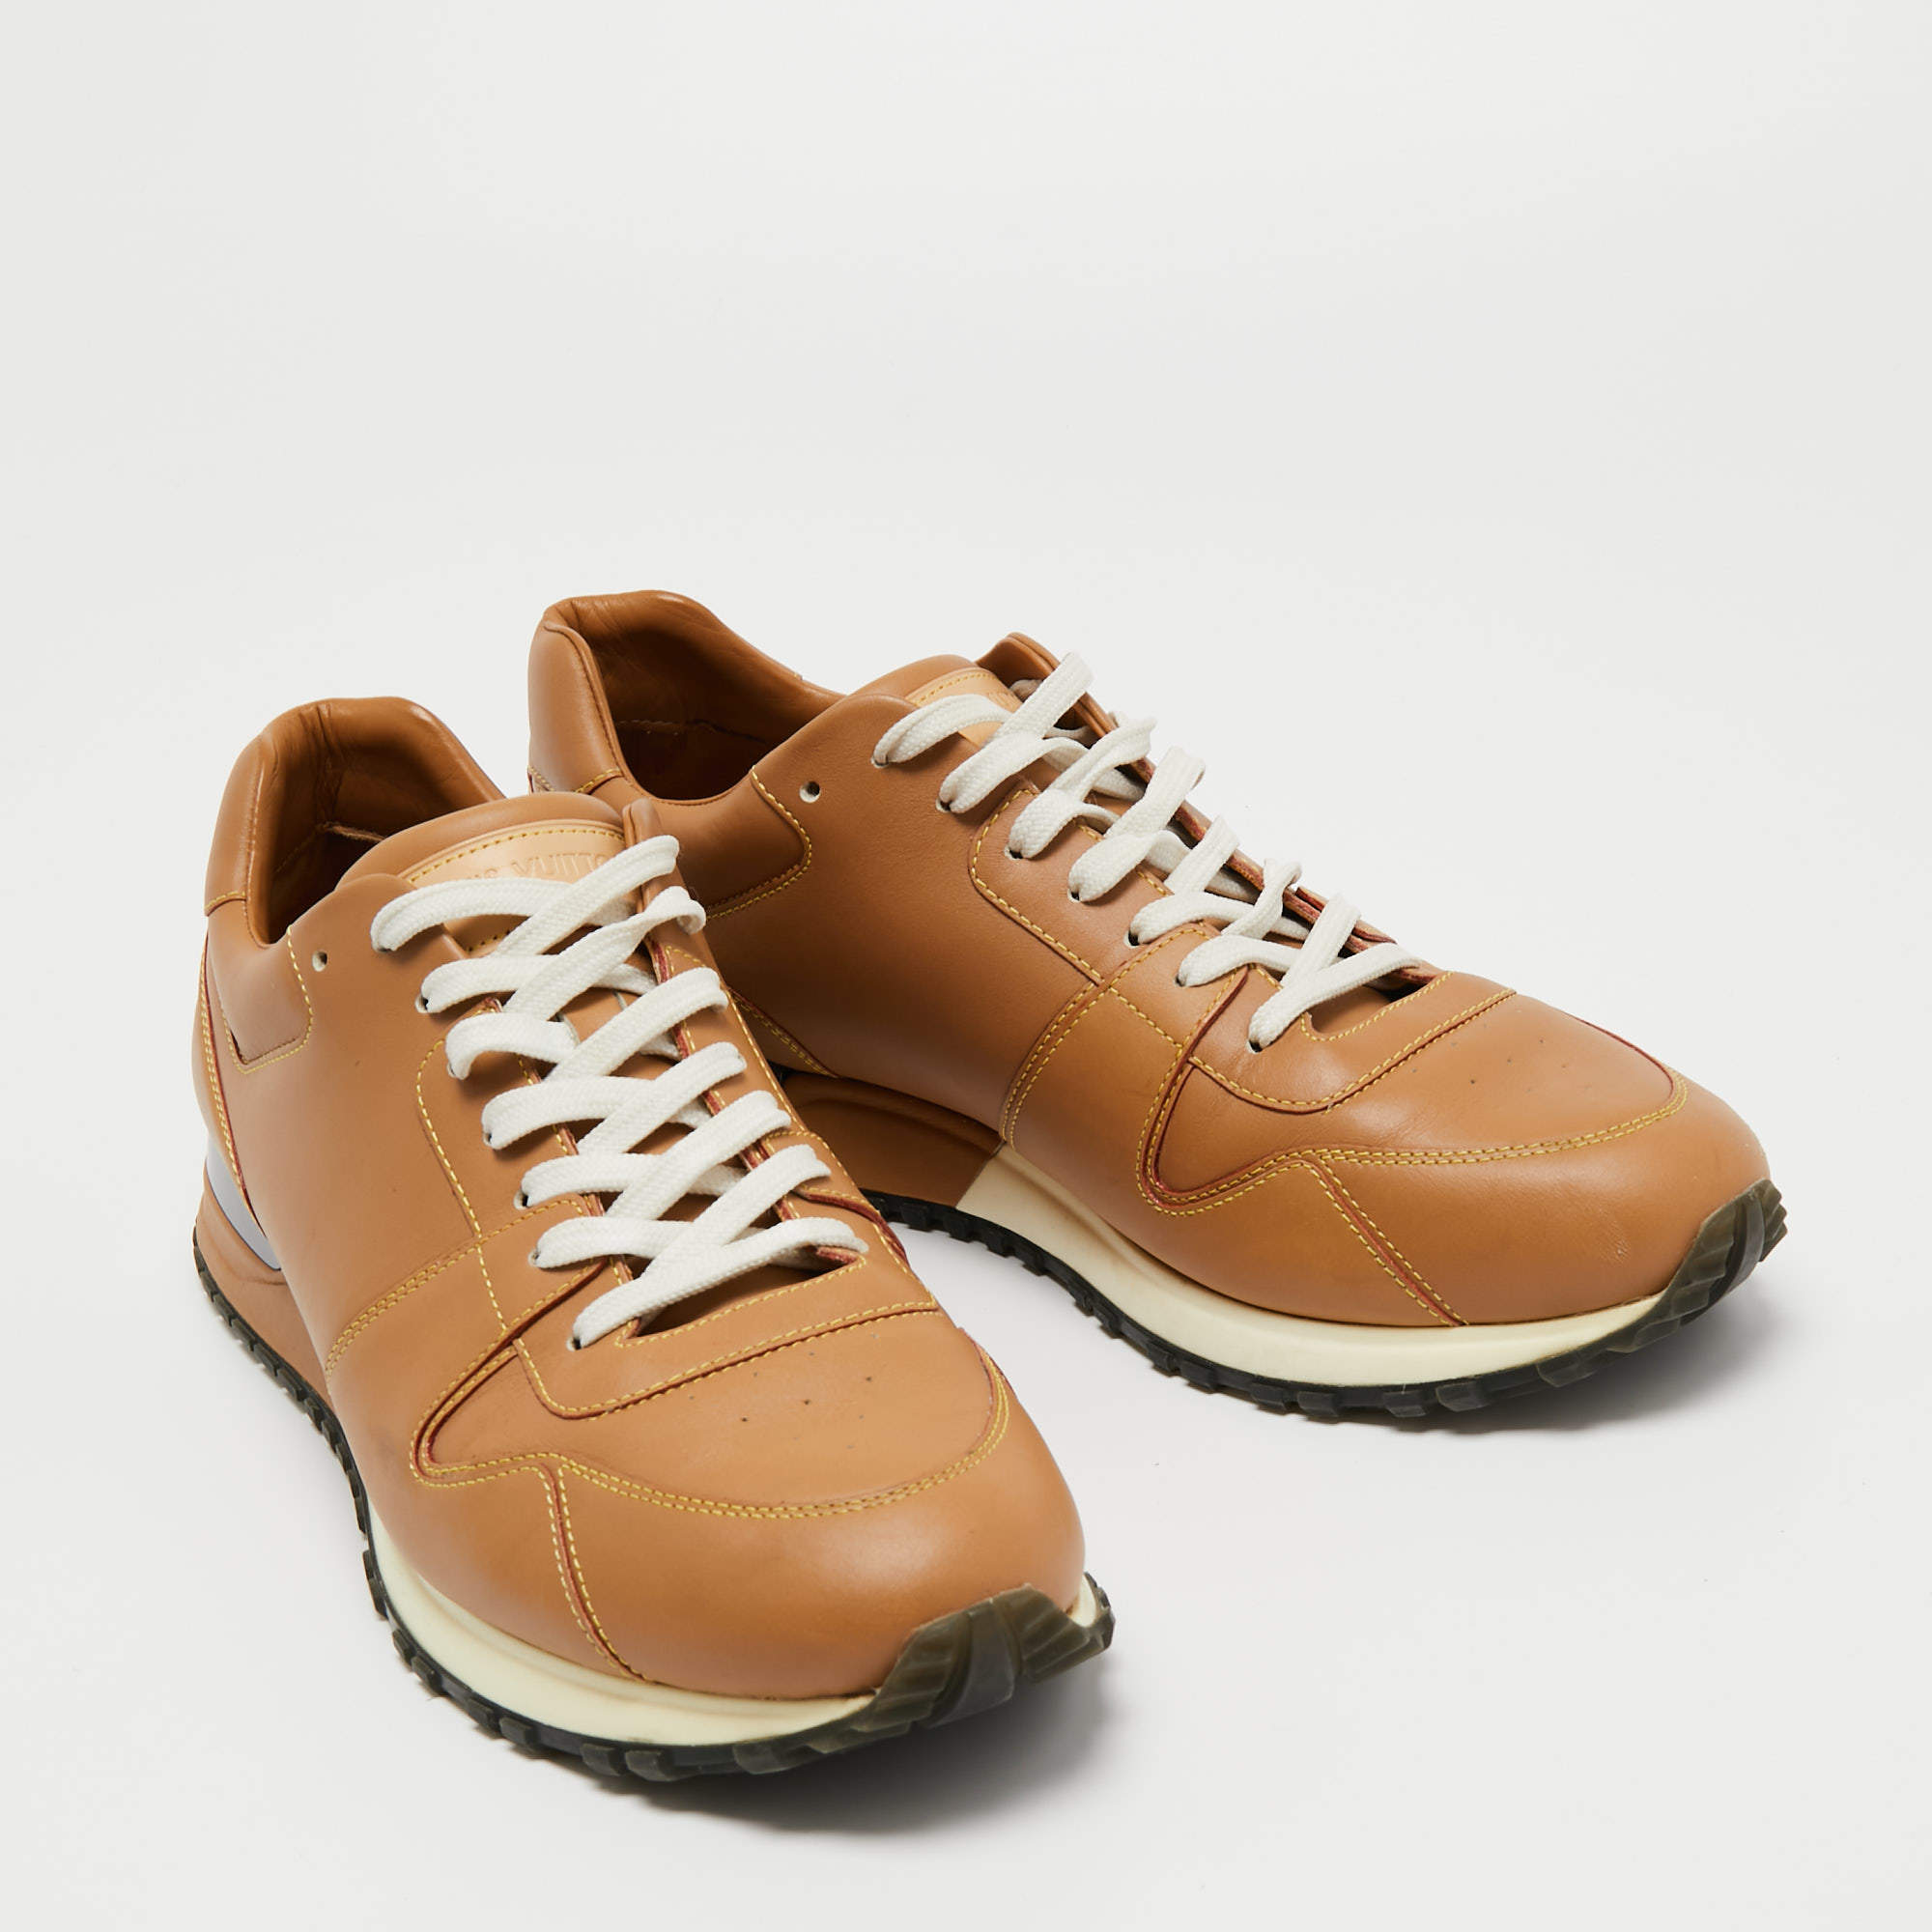 Run away leather trainers Louis Vuitton Brown size 37.5 EU in Leather -  35045242